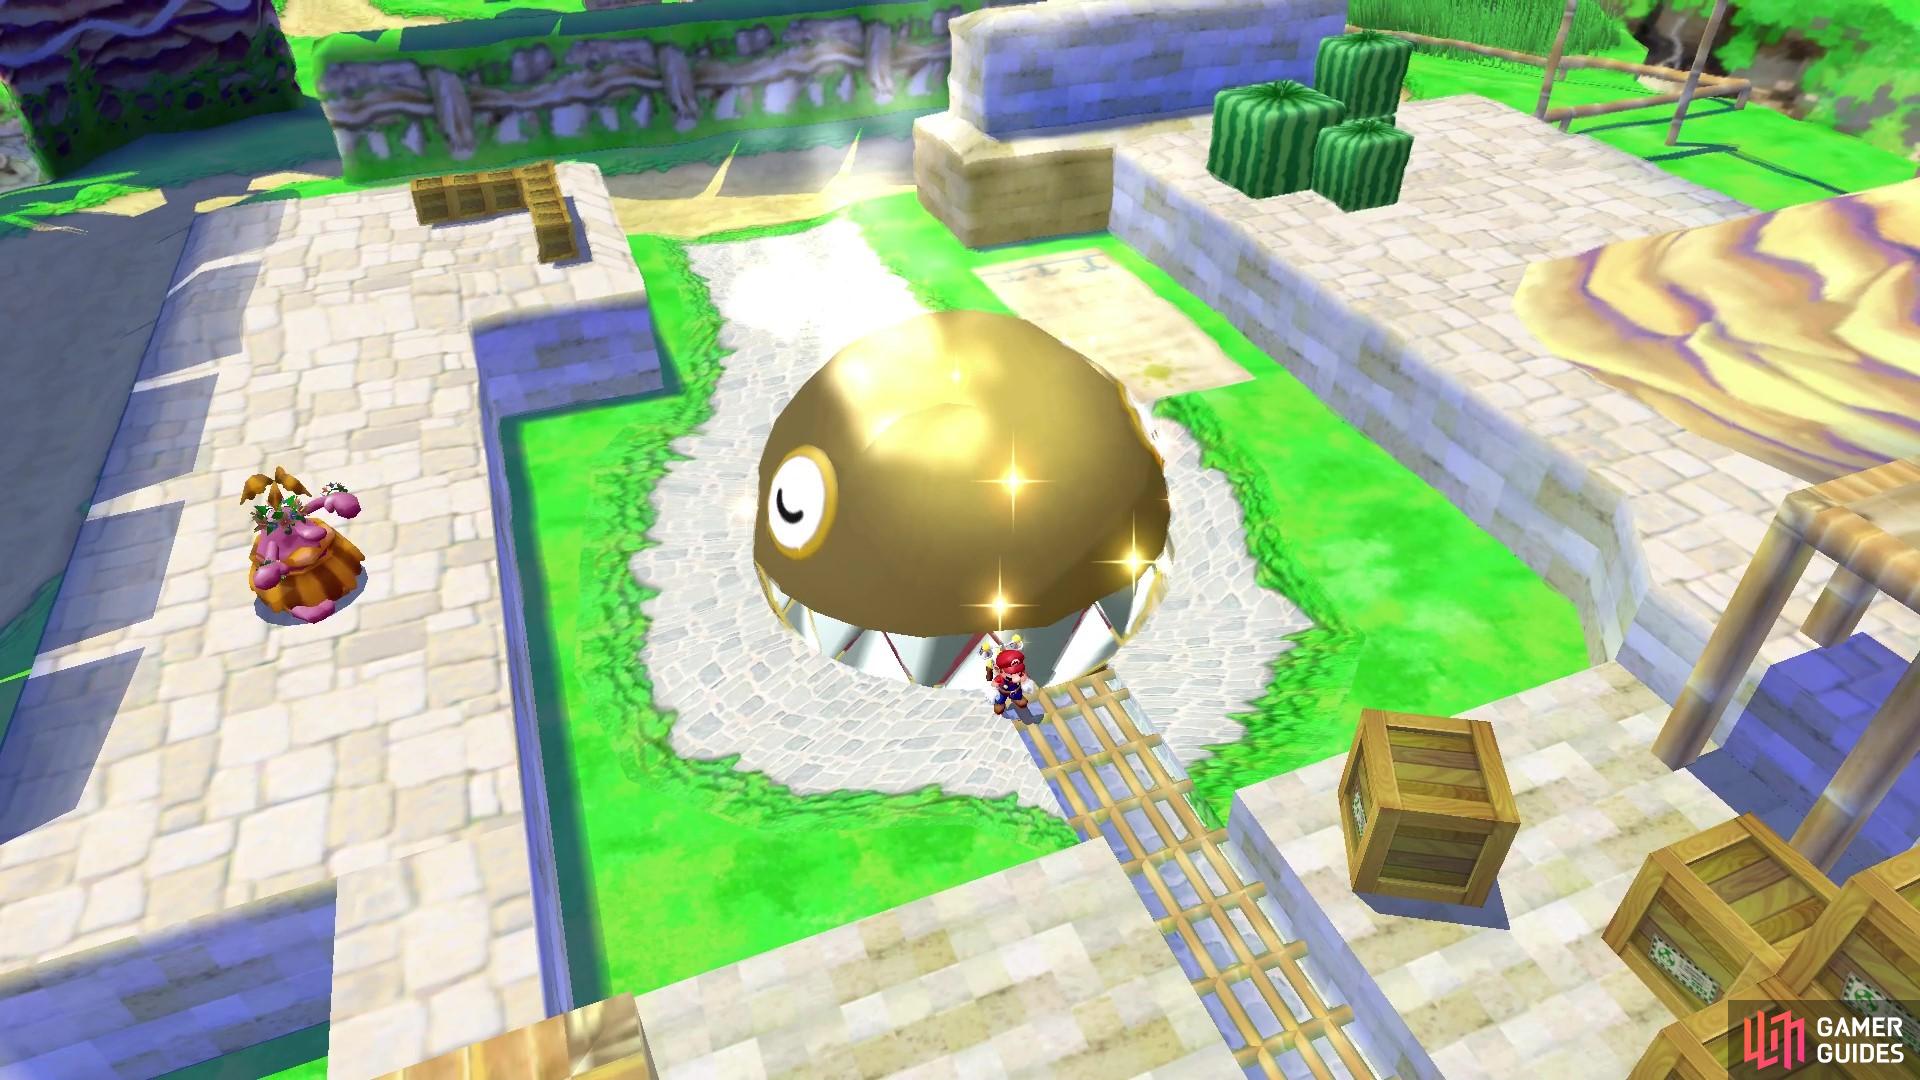 The Chain Chomp will be shiny and golden once he's had his bath!